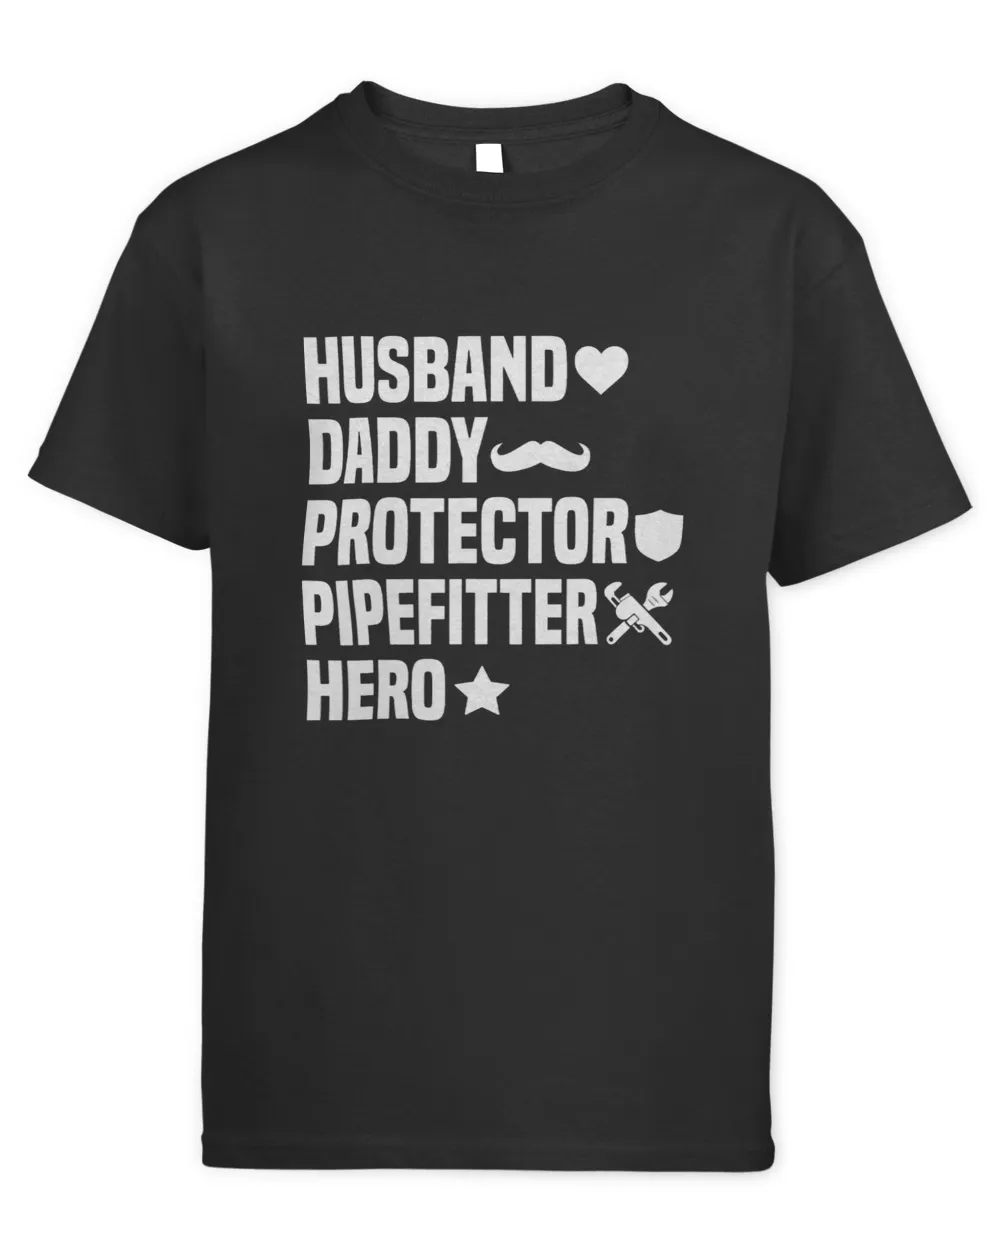 Mens Husband Daddy Protector Pipefitter Hero